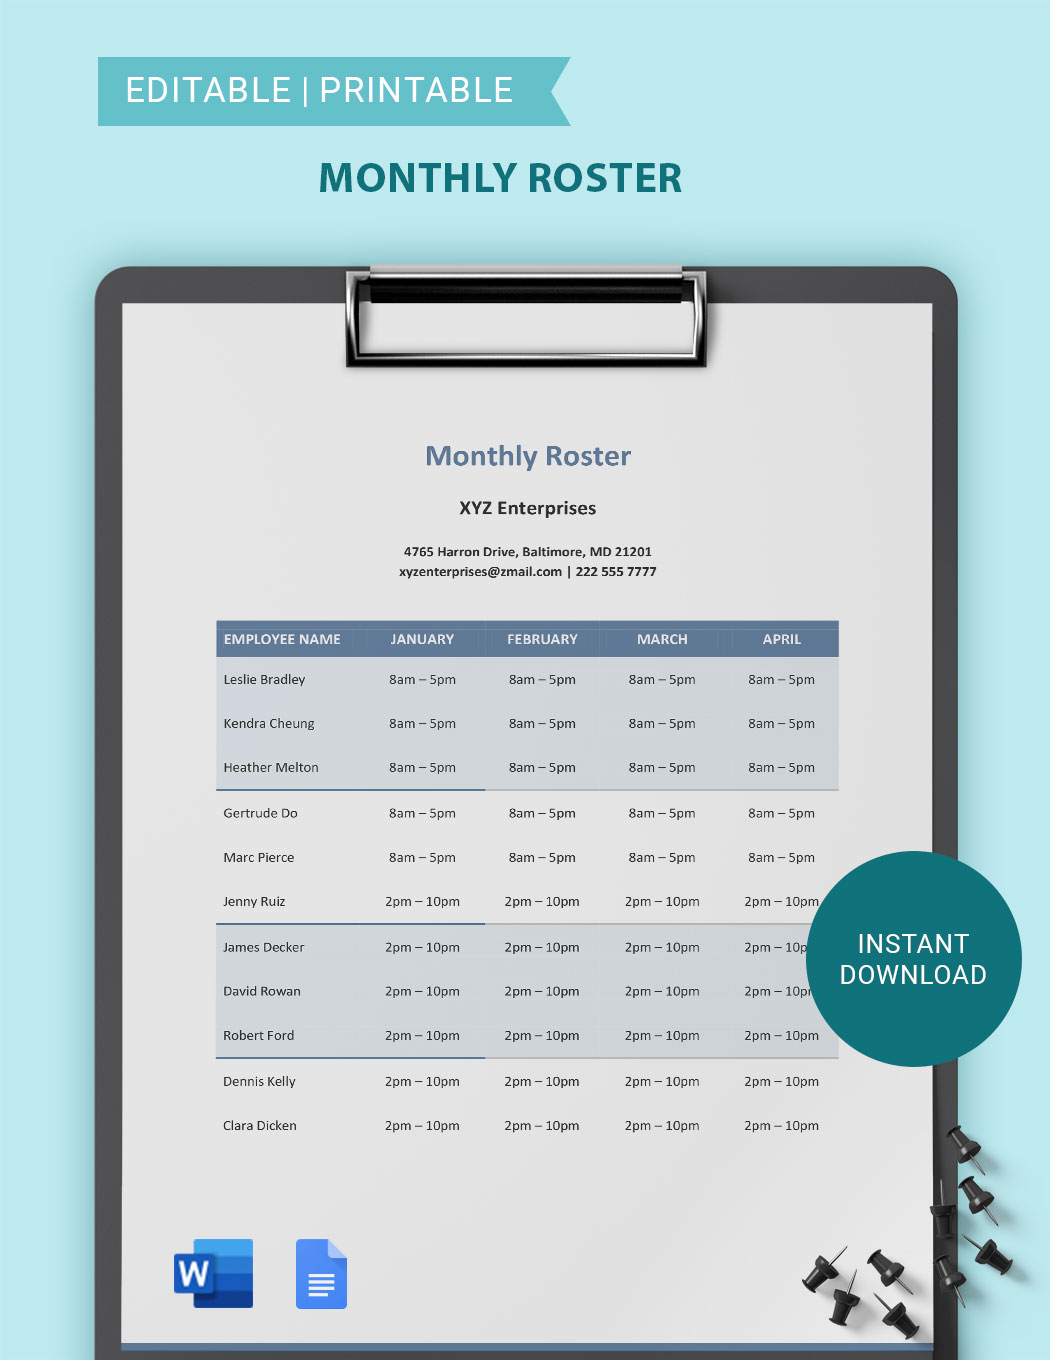 Monthly Roster Template Download in Word, Google Docs